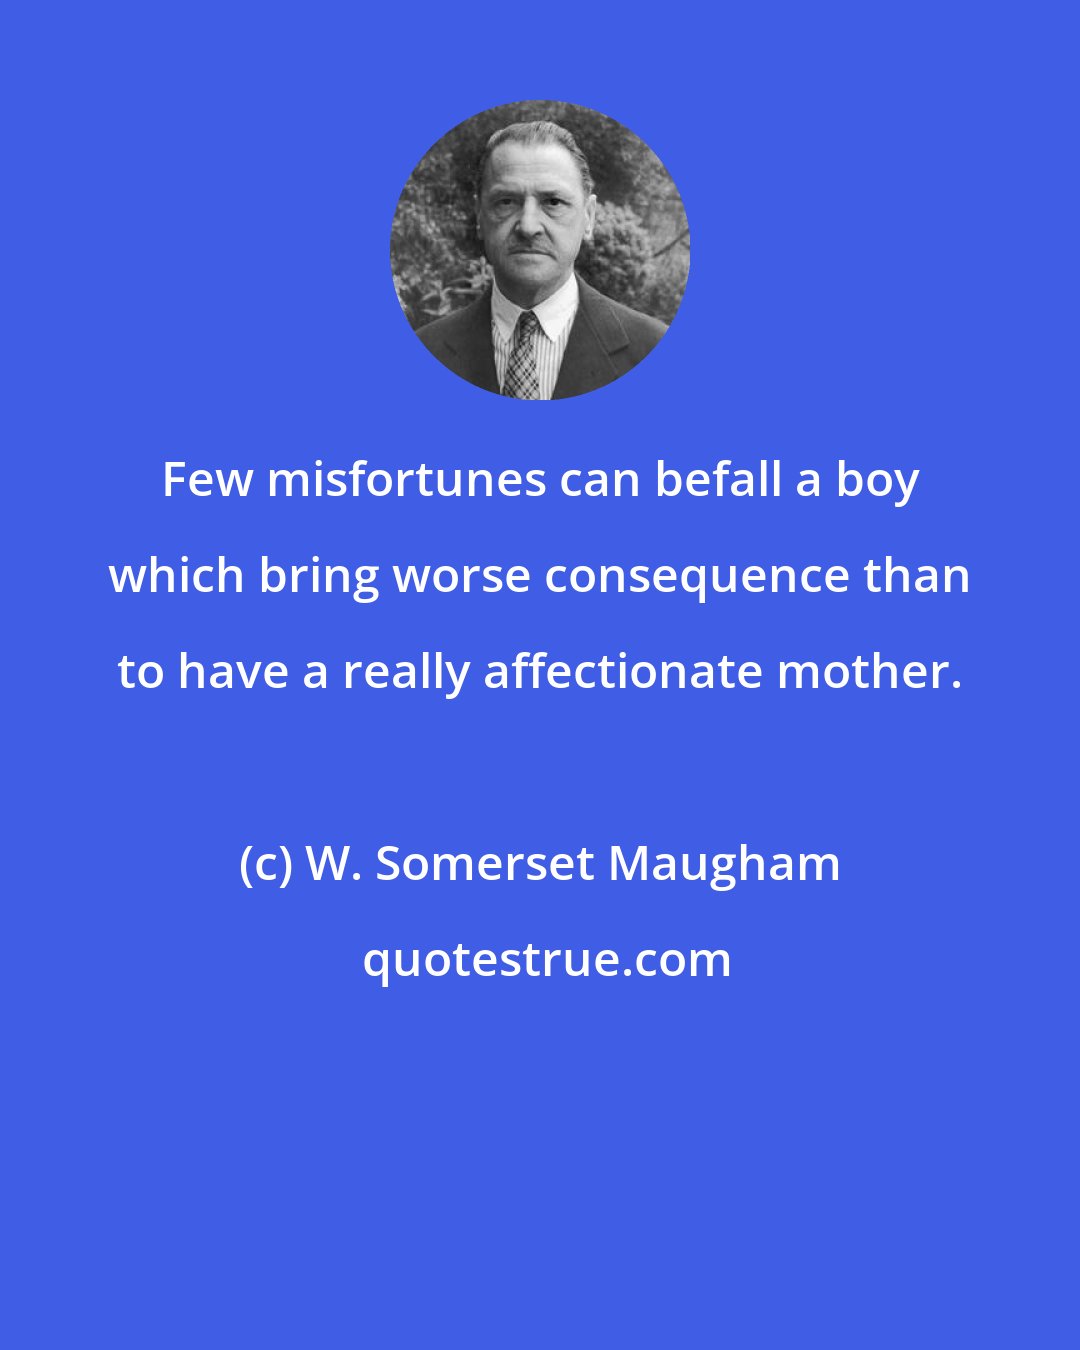 W. Somerset Maugham: Few misfortunes can befall a boy which bring worse consequence than to have a really affectionate mother.